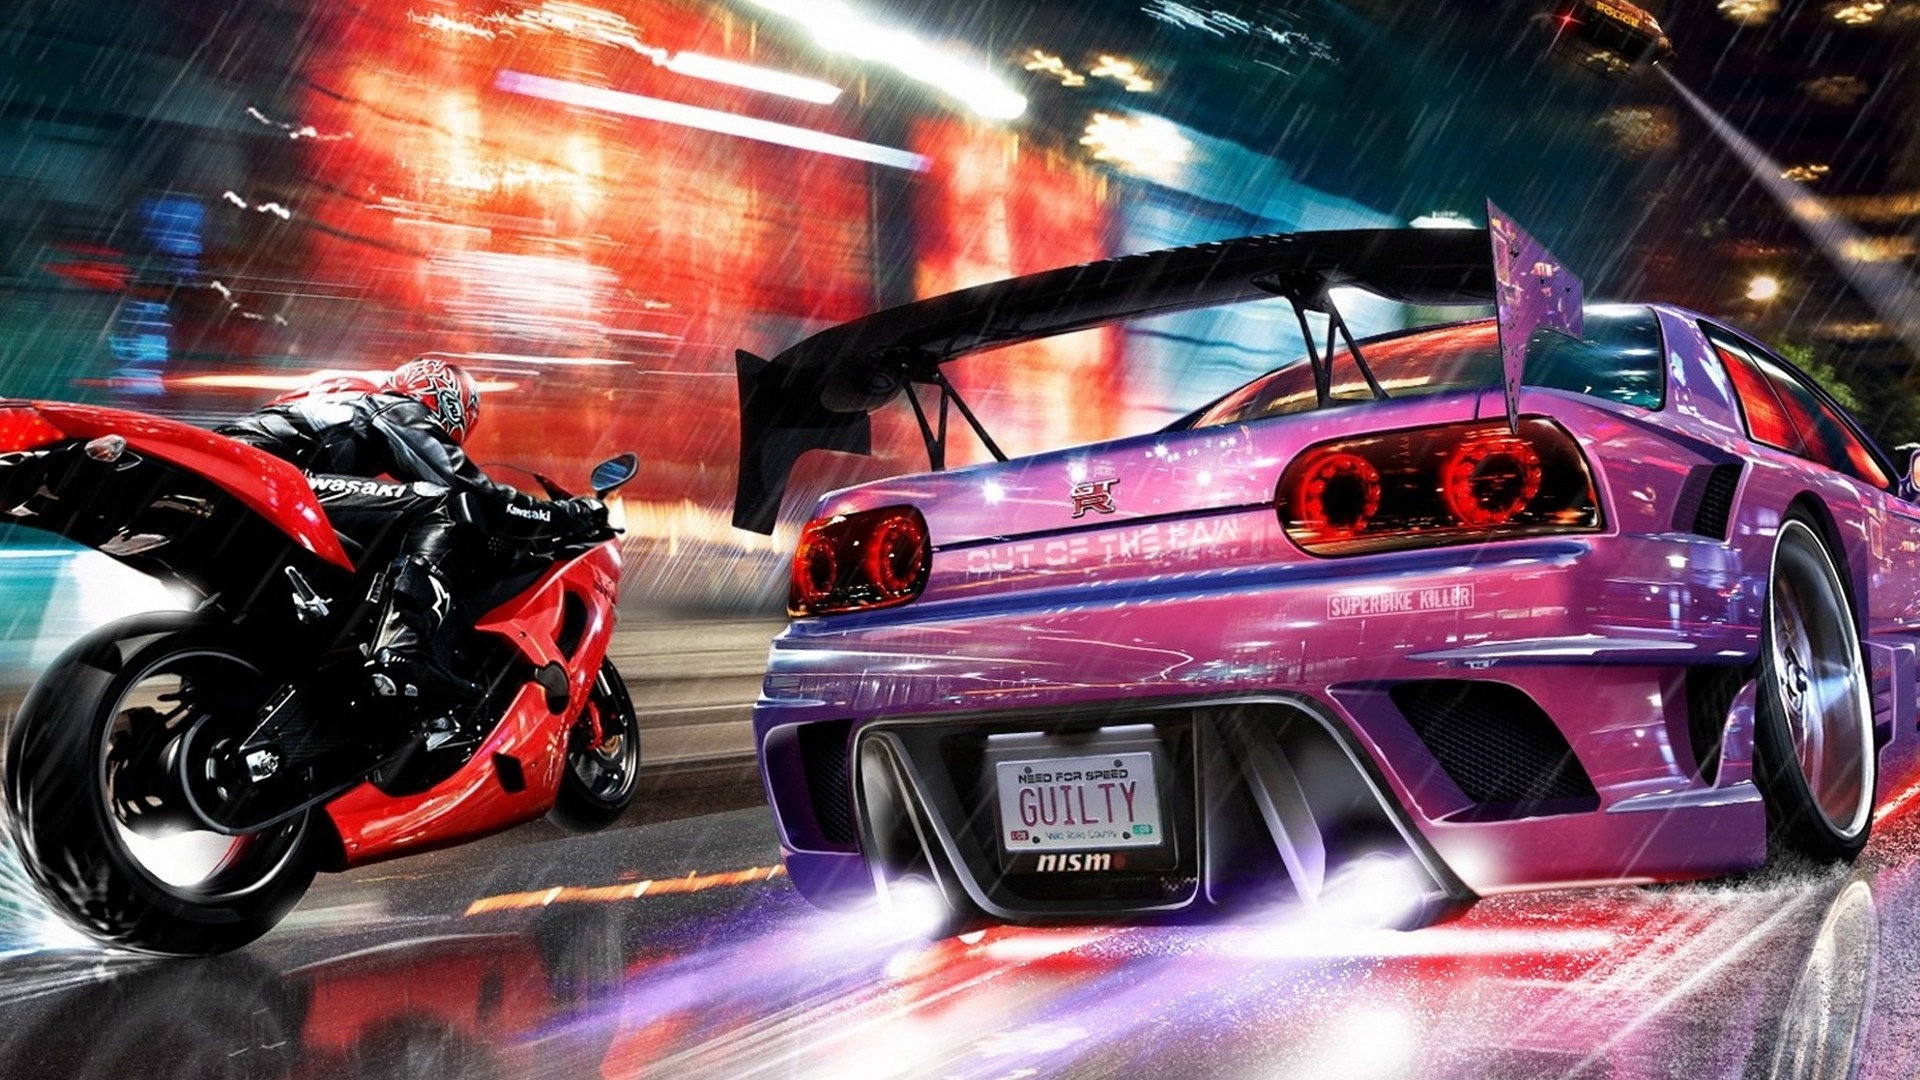 Need for Speed: The Run HD wallpapers #5 - 1920x1080